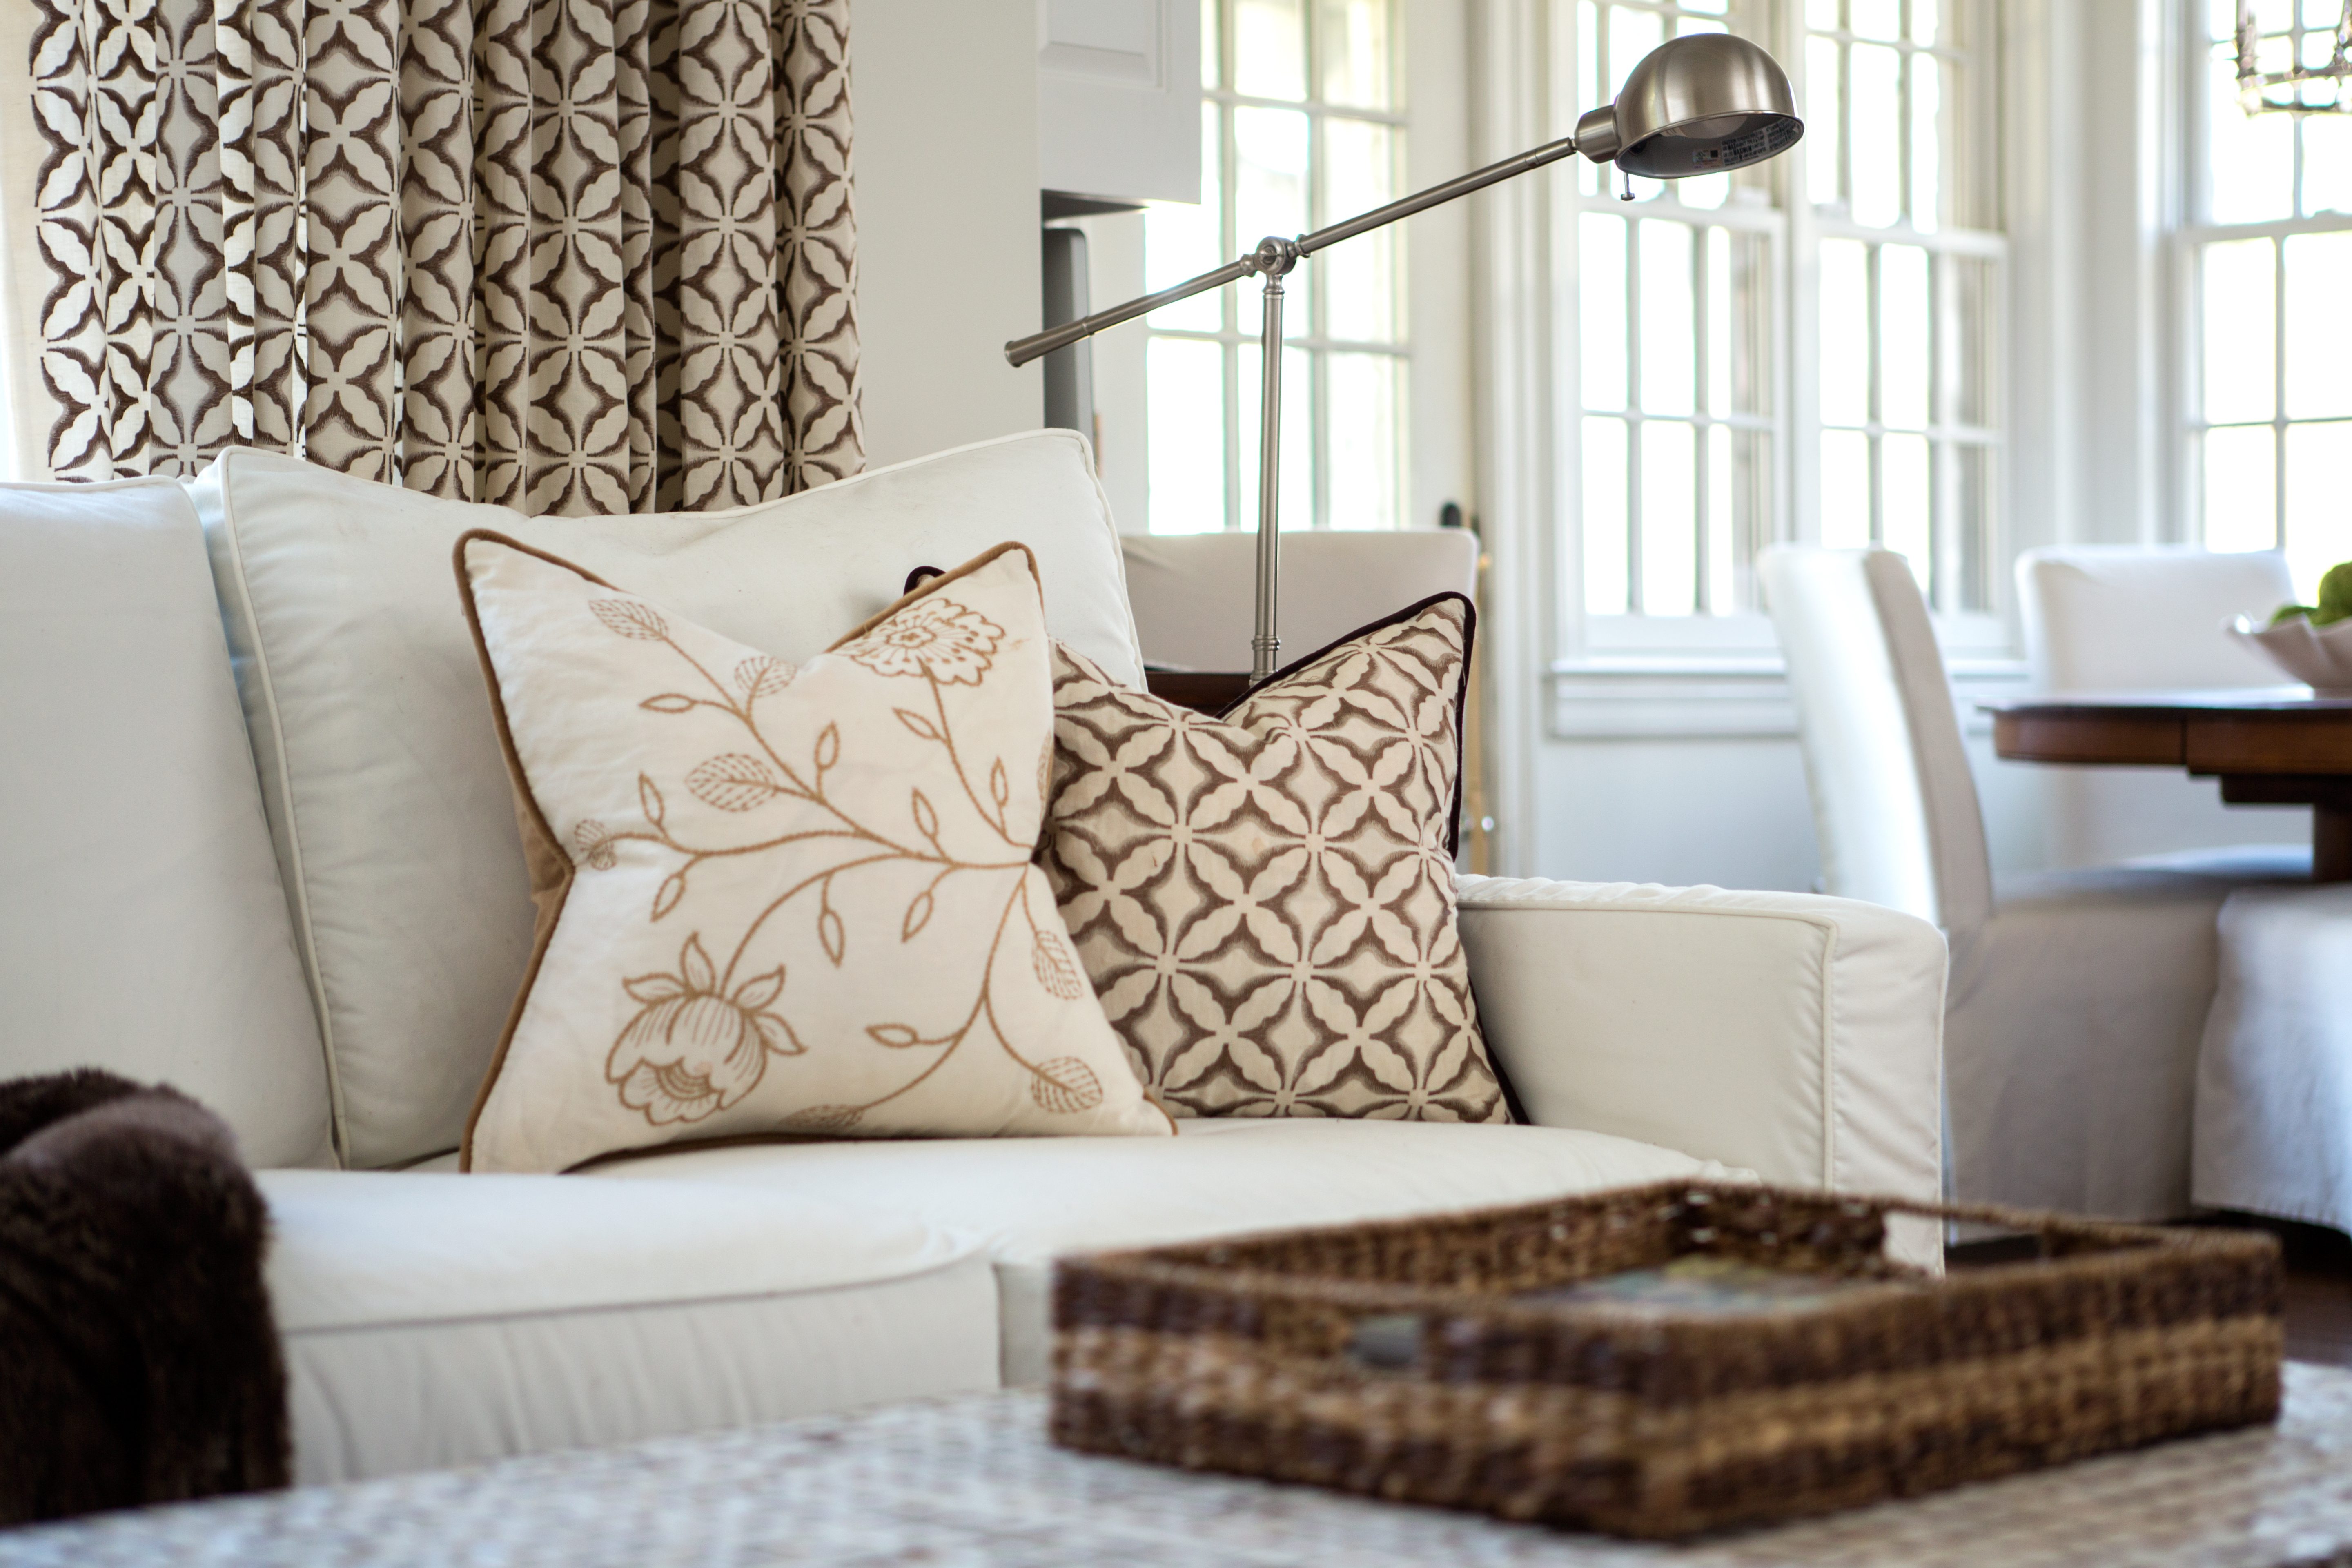 Close-up photo of a couch with warm-toned pillows and matching window treatments behind